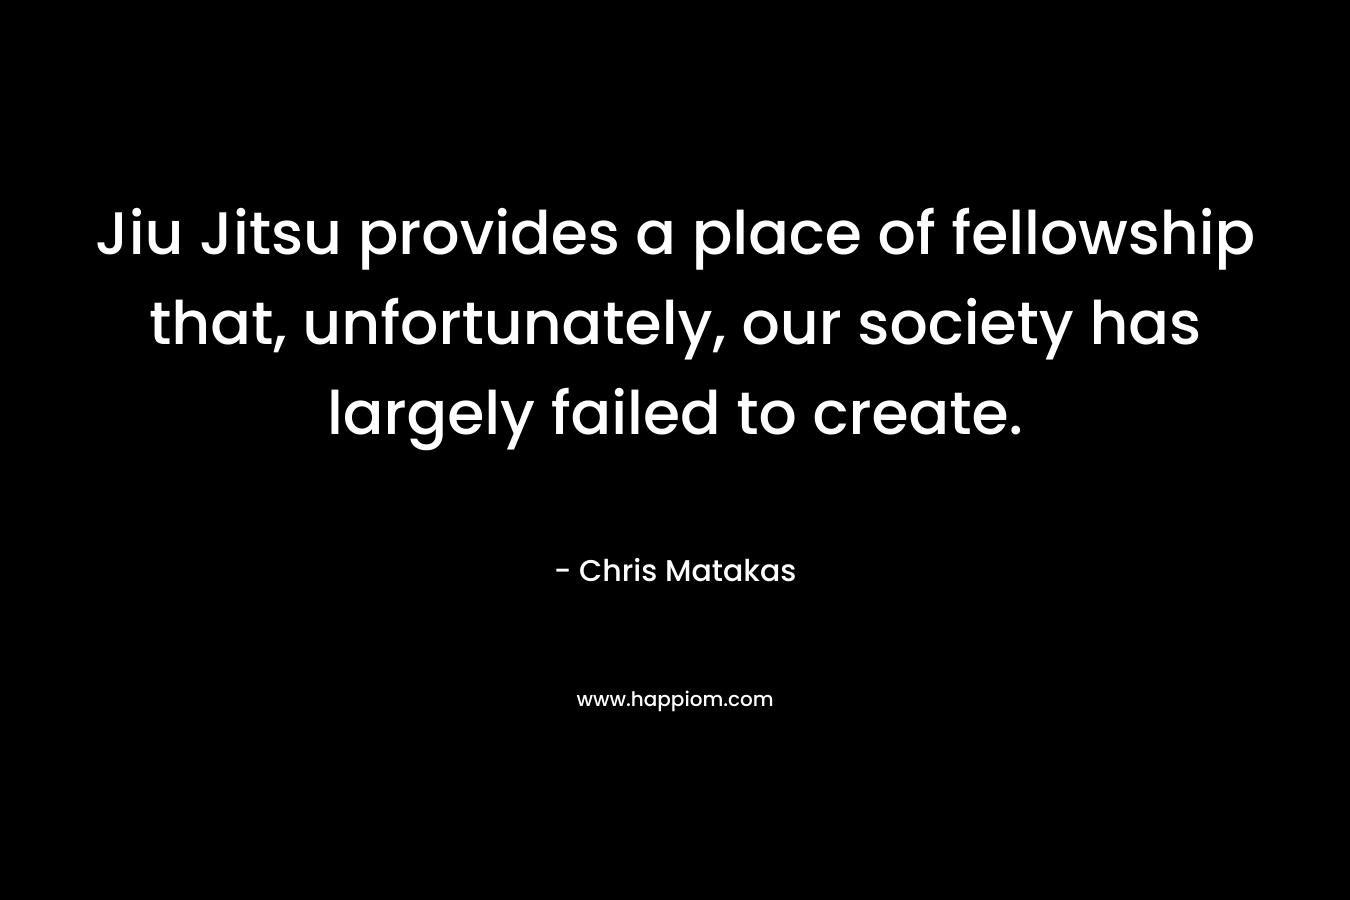 Jiu Jitsu provides a place of fellowship that, unfortunately, our society has largely failed to create. – Chris Matakas